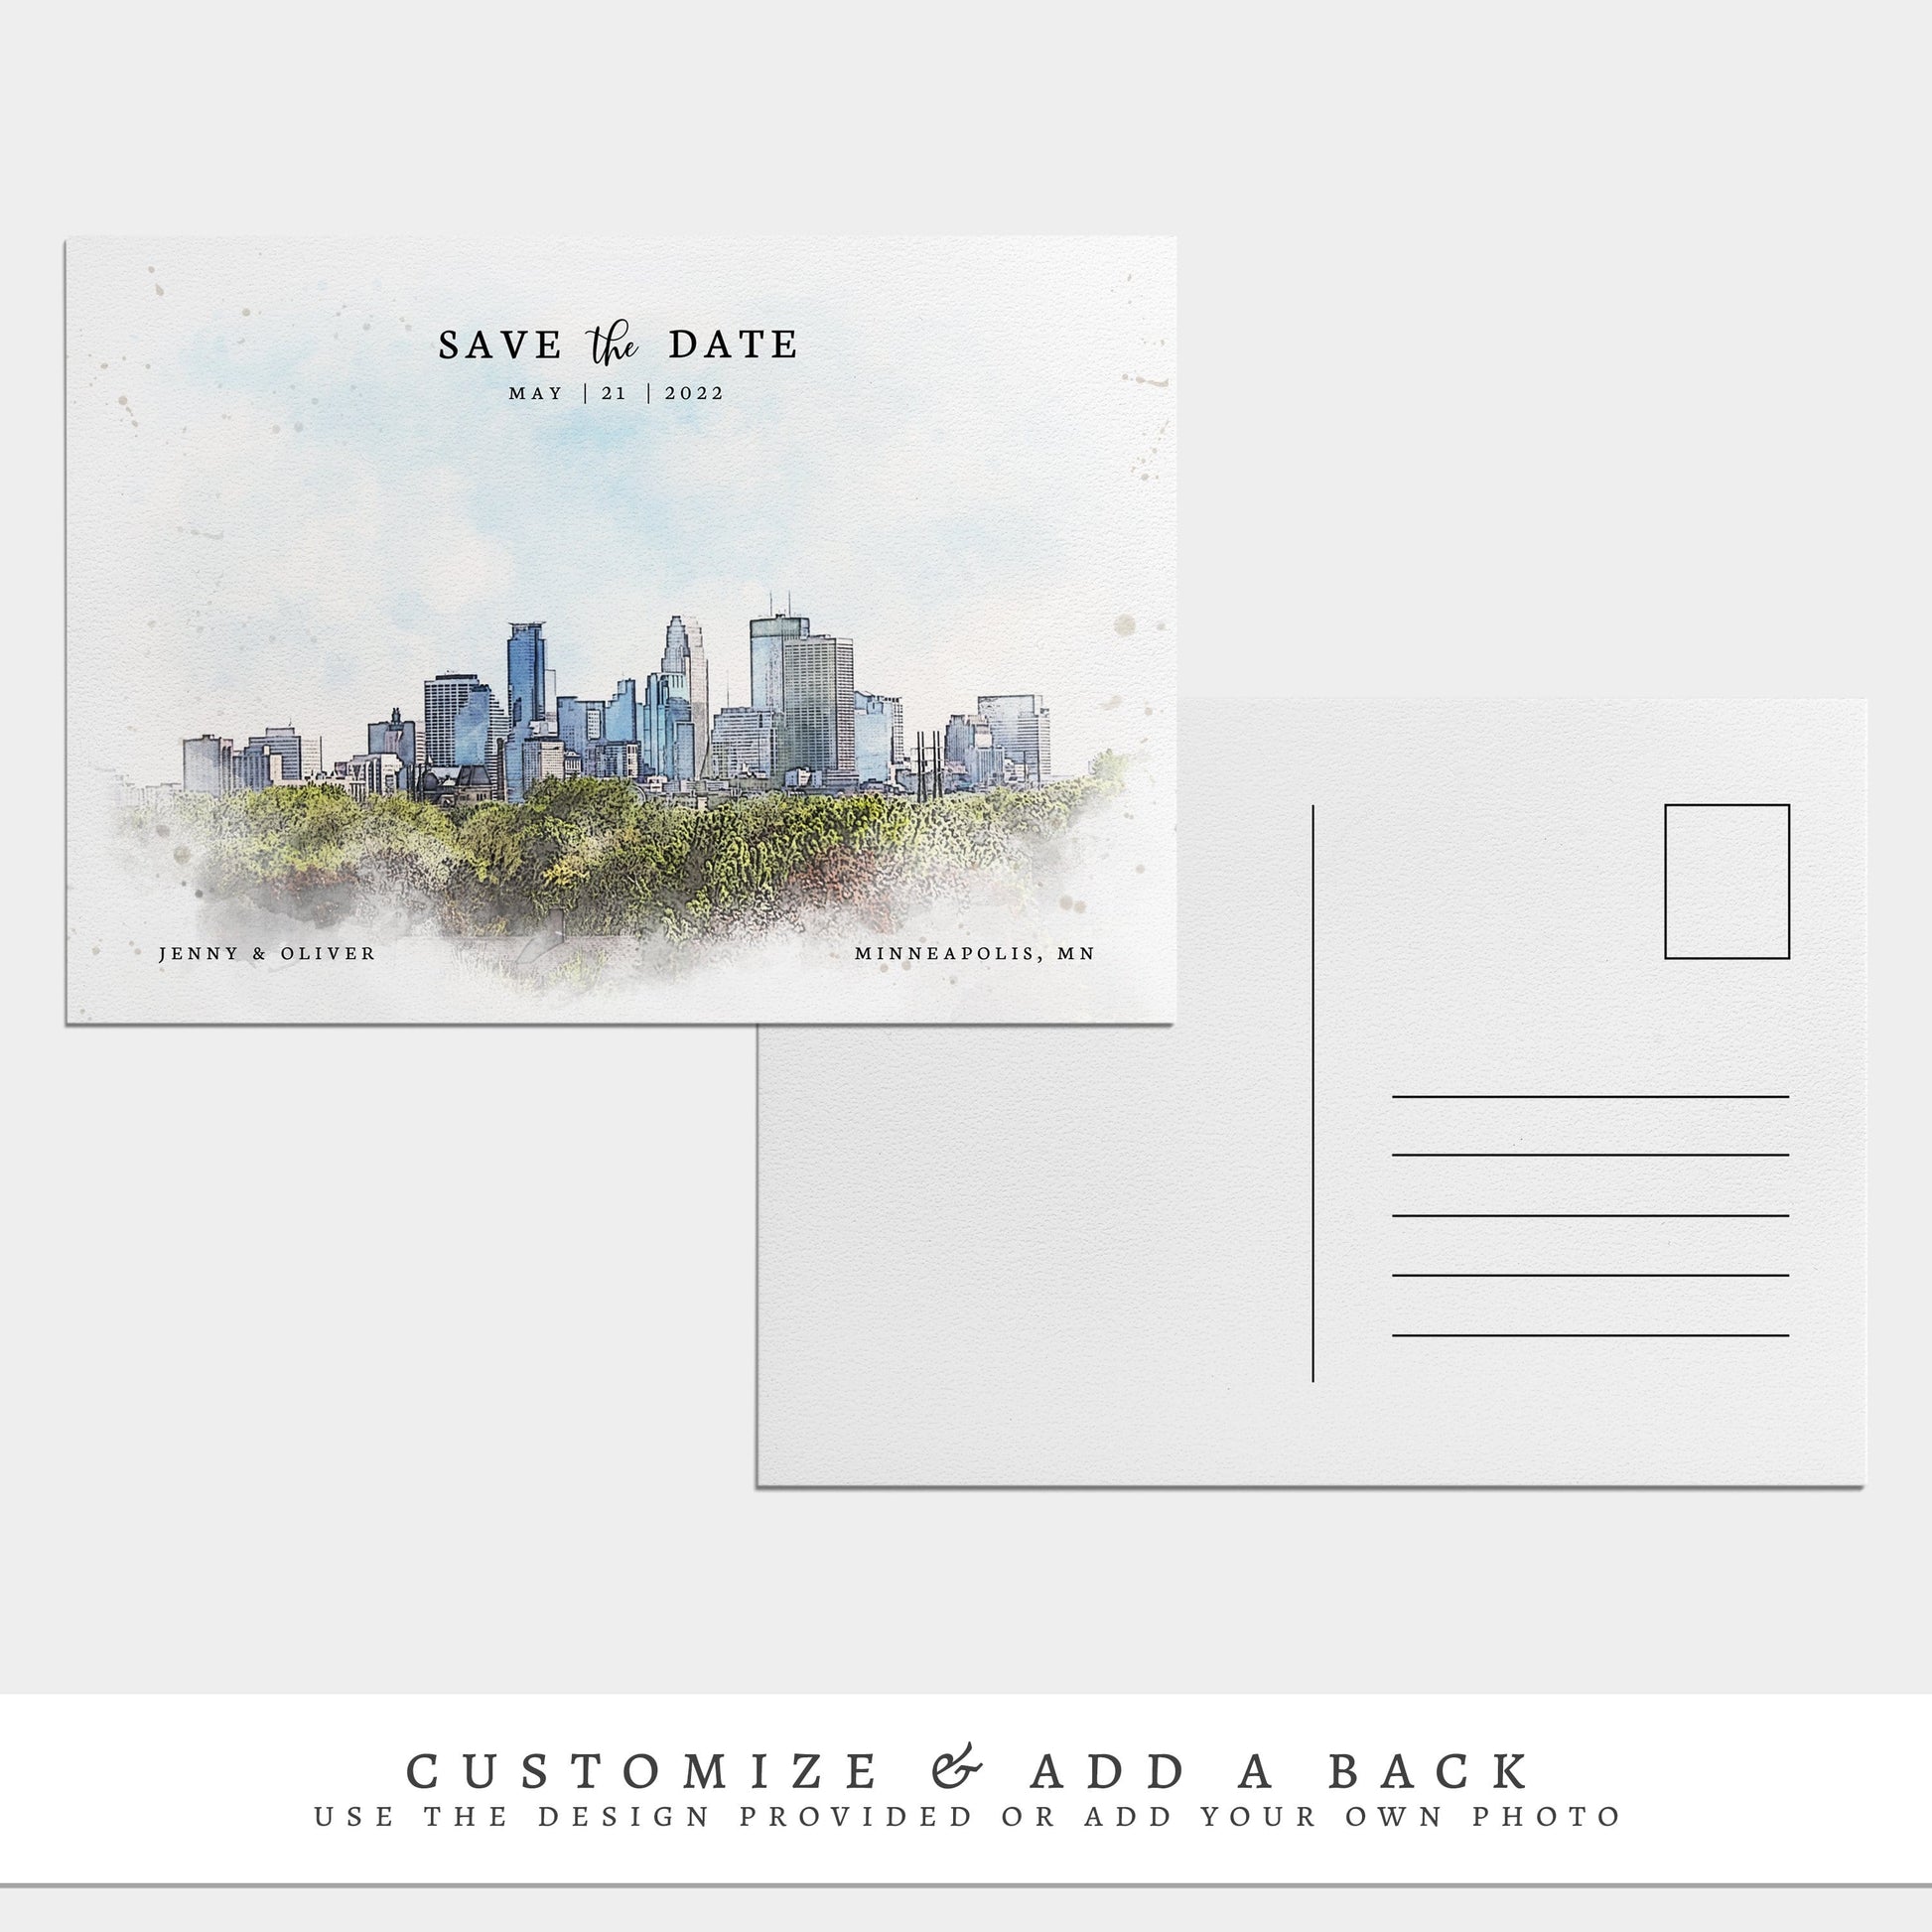 Loblolly Creative 825 - Arts & Entertainment > Party & Celebration > Party Supplies > Invitations Minneapolis Skyline Watercolor Wedding Save the Date